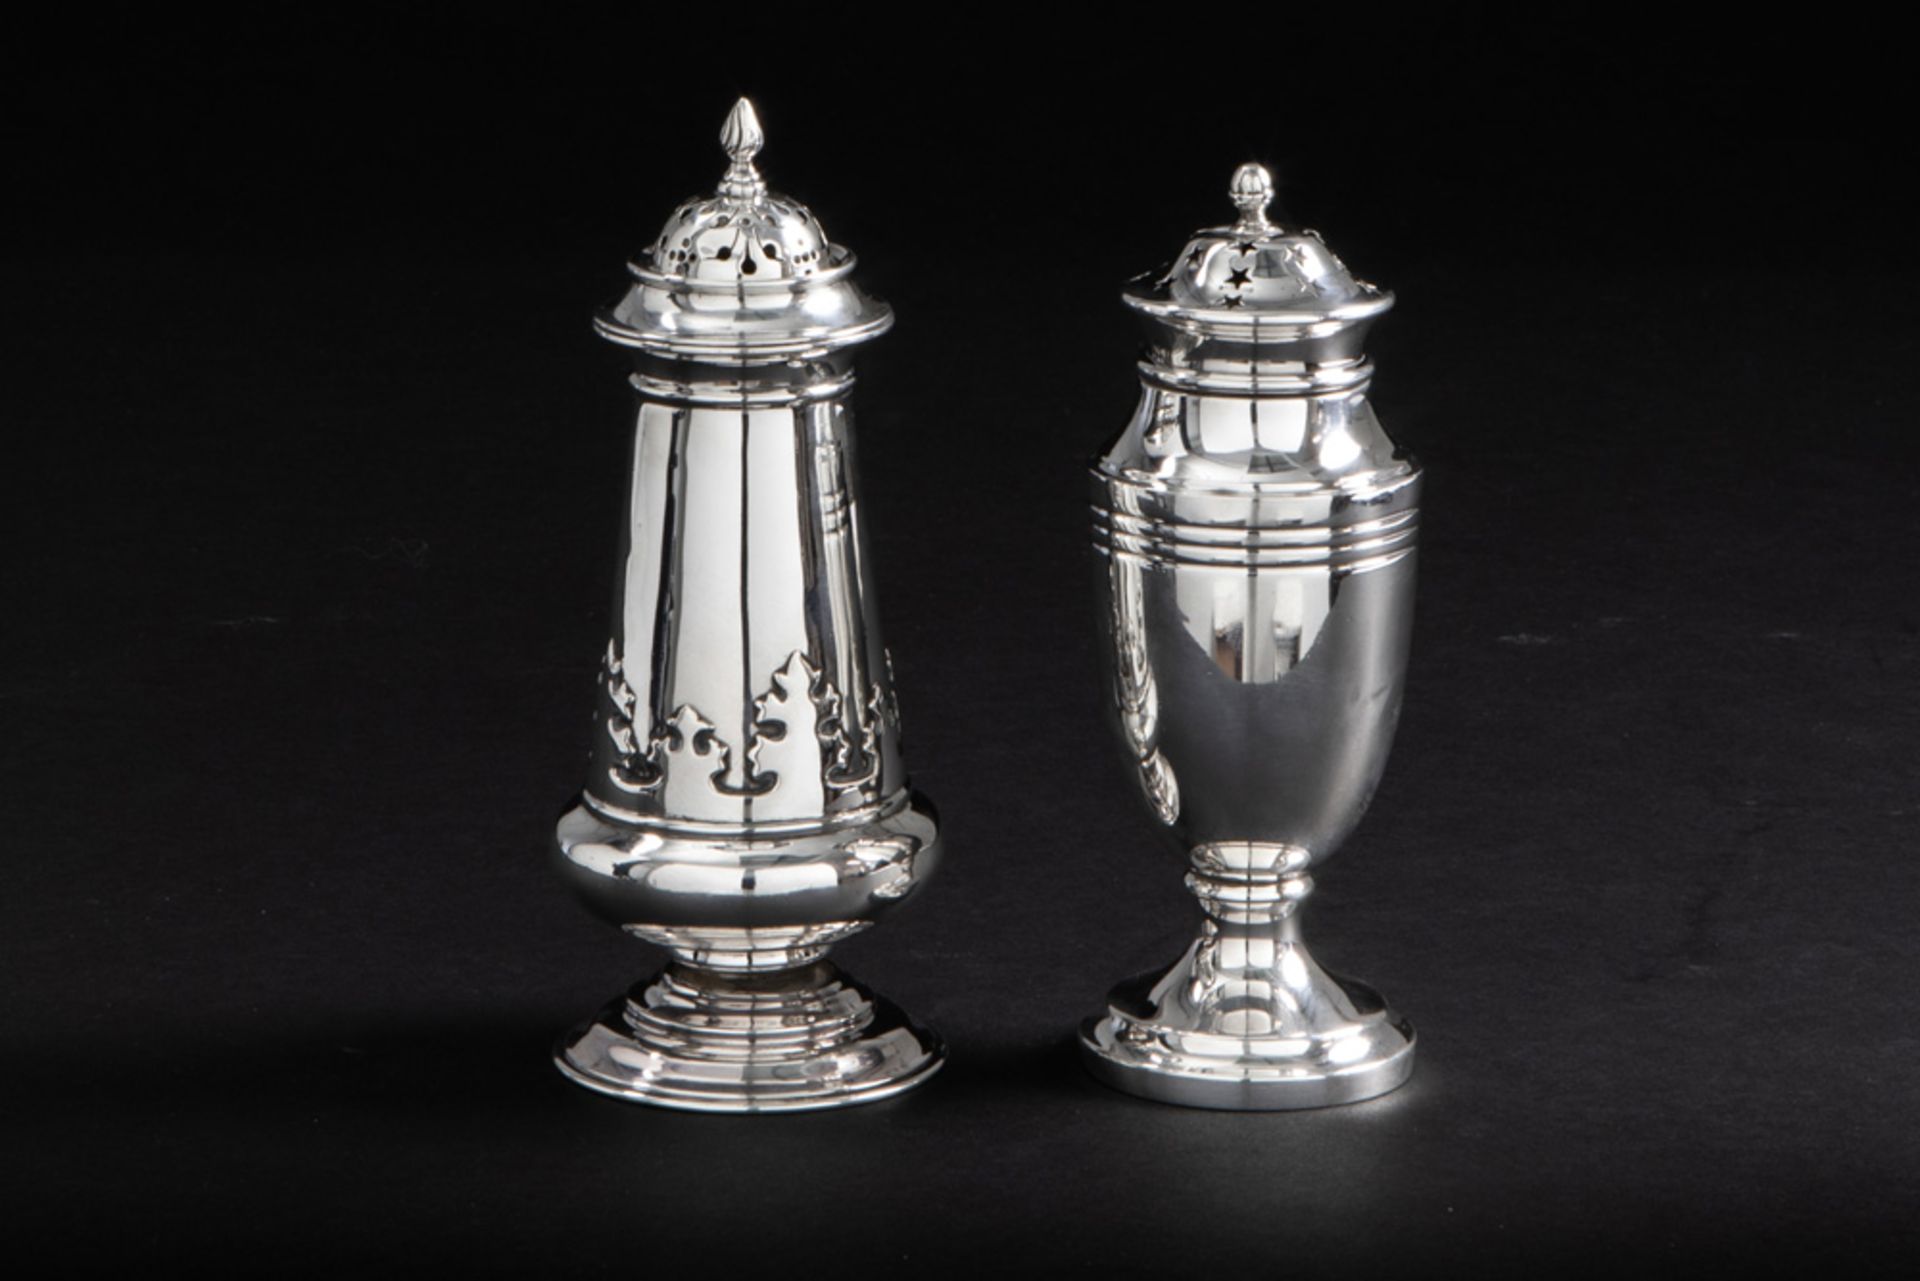 two English casters in marked silver, one from Birmingham dated 1958 & one from London dated 1915 || - Image 2 of 5